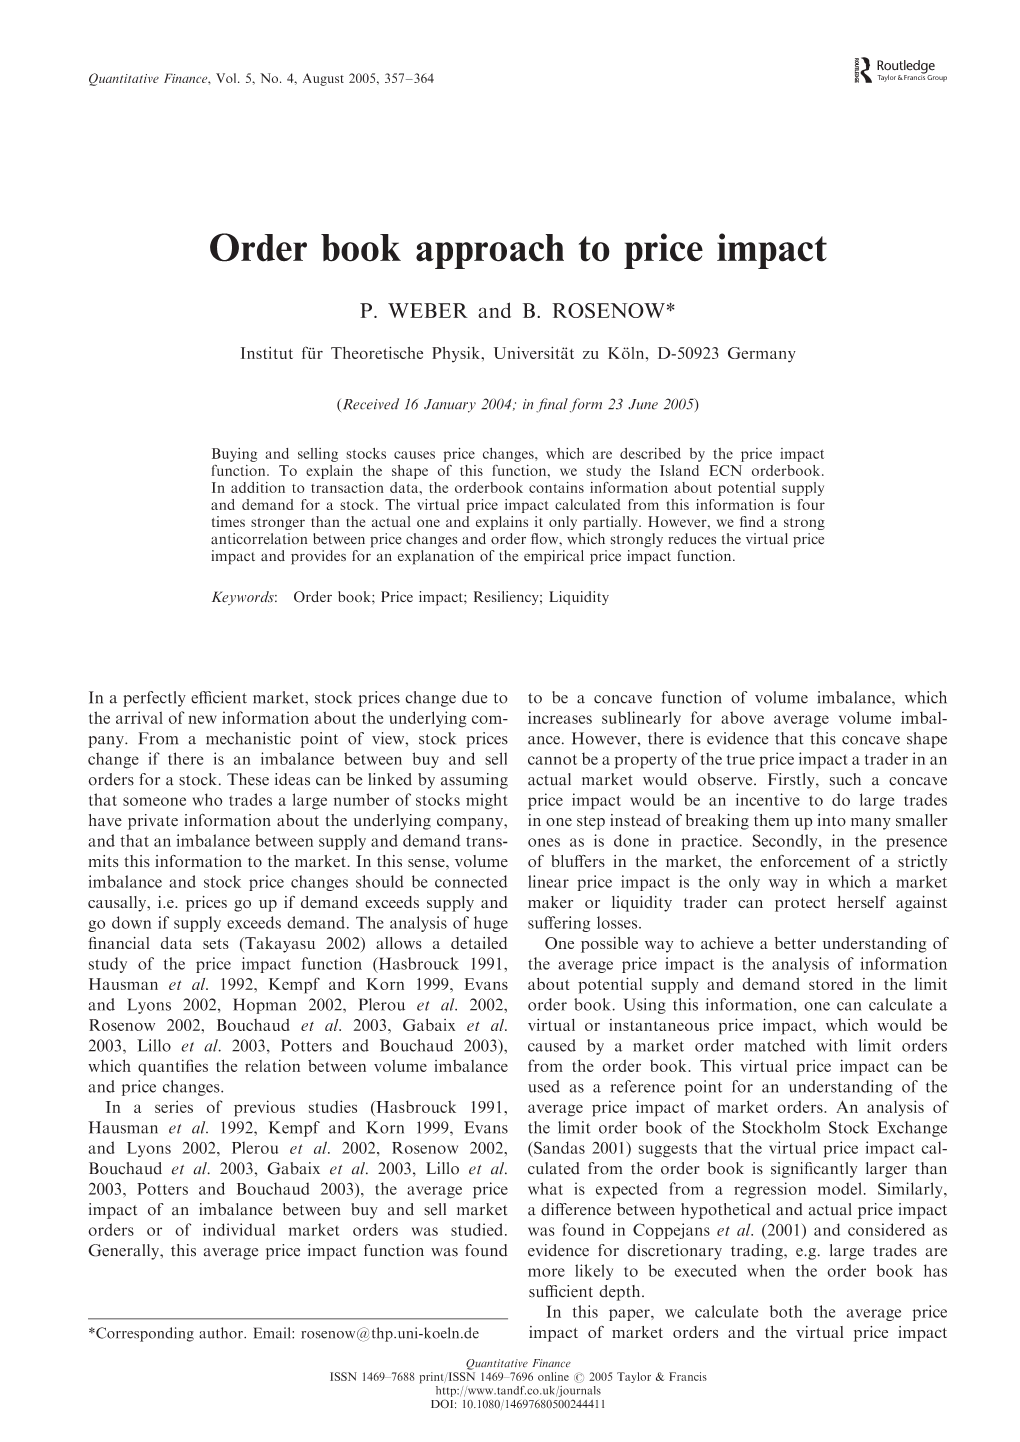 Order Book Approach to Price Impact